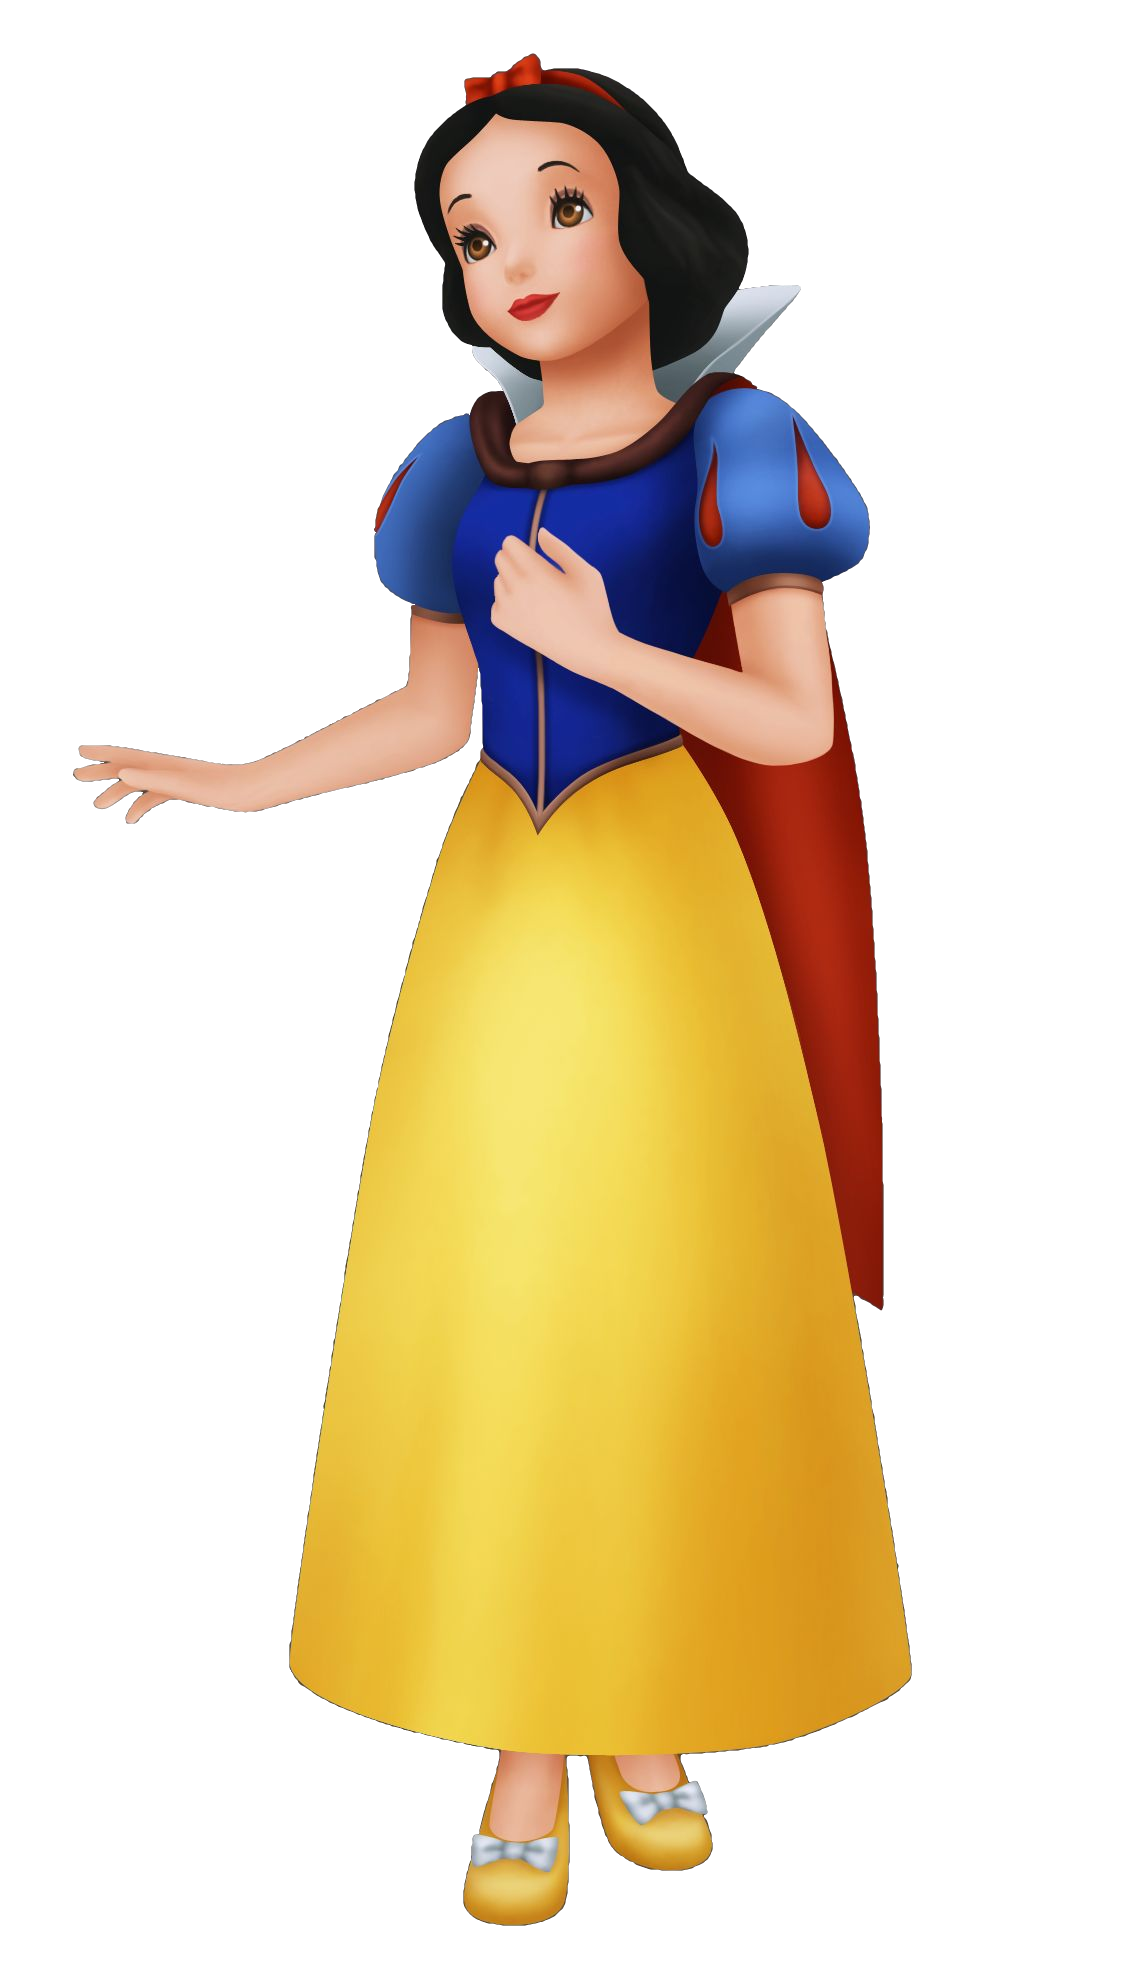 Snow White Free Download PNG Image